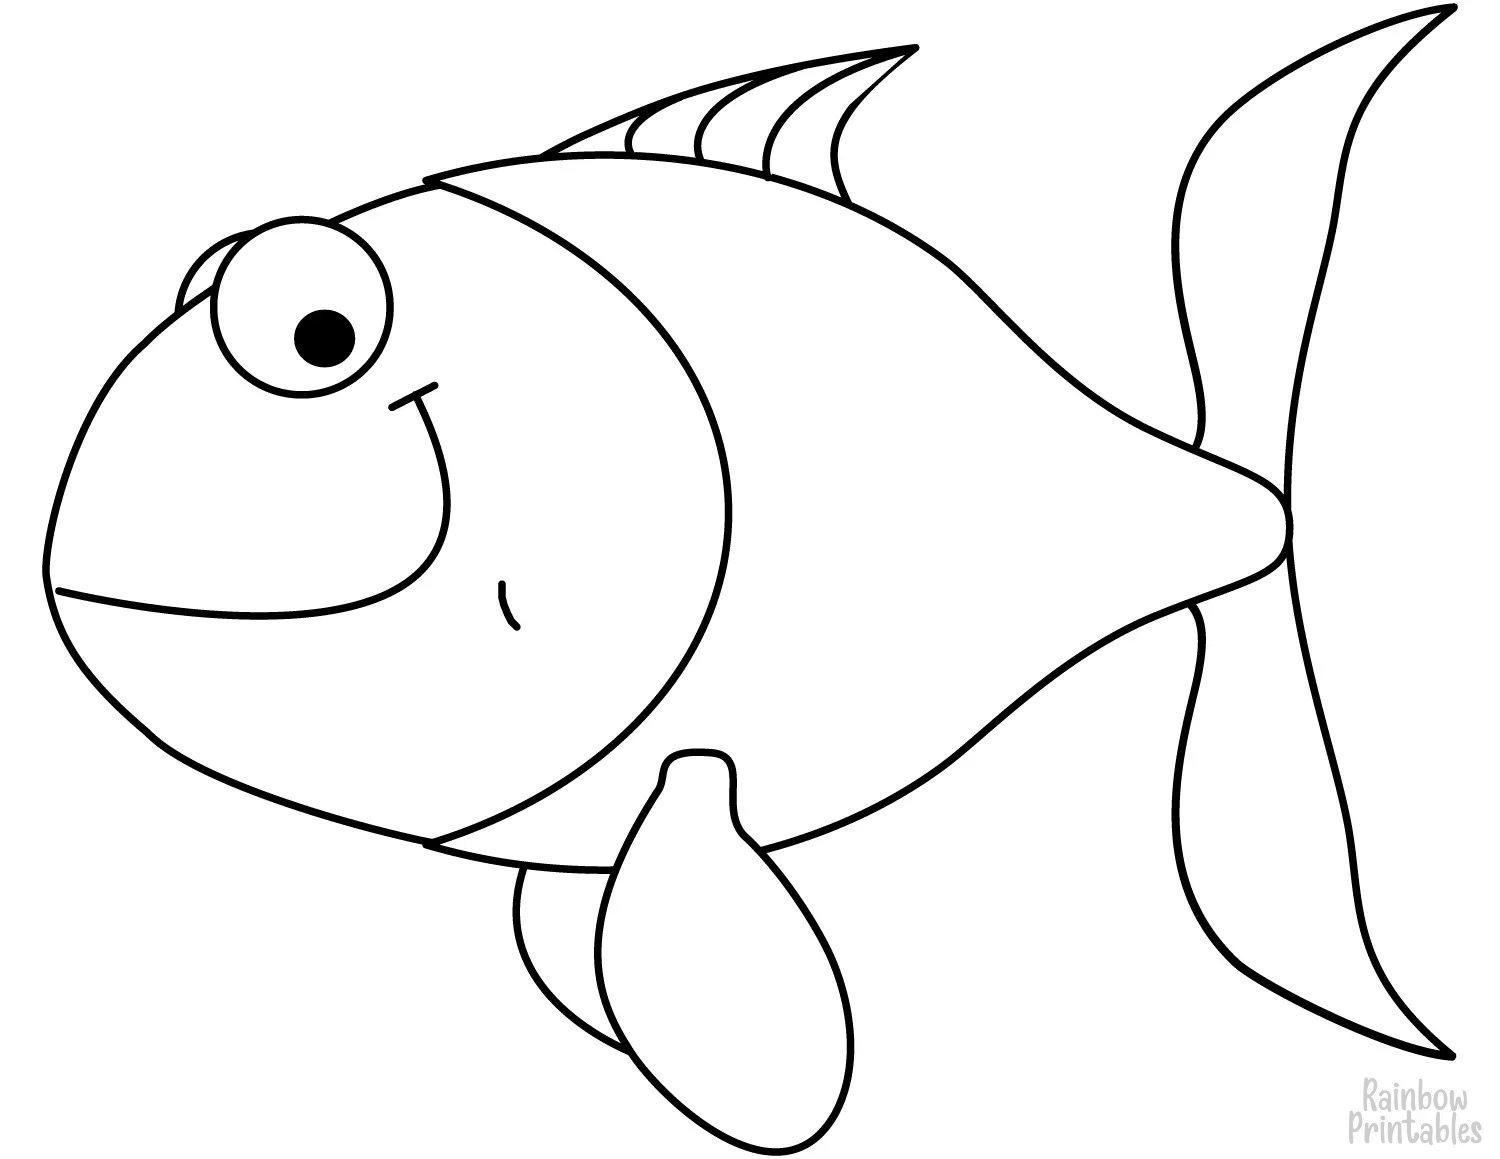 SIMPLE-EASY-line-drawings-KISSING-FISH-coloring-page-for-kids3